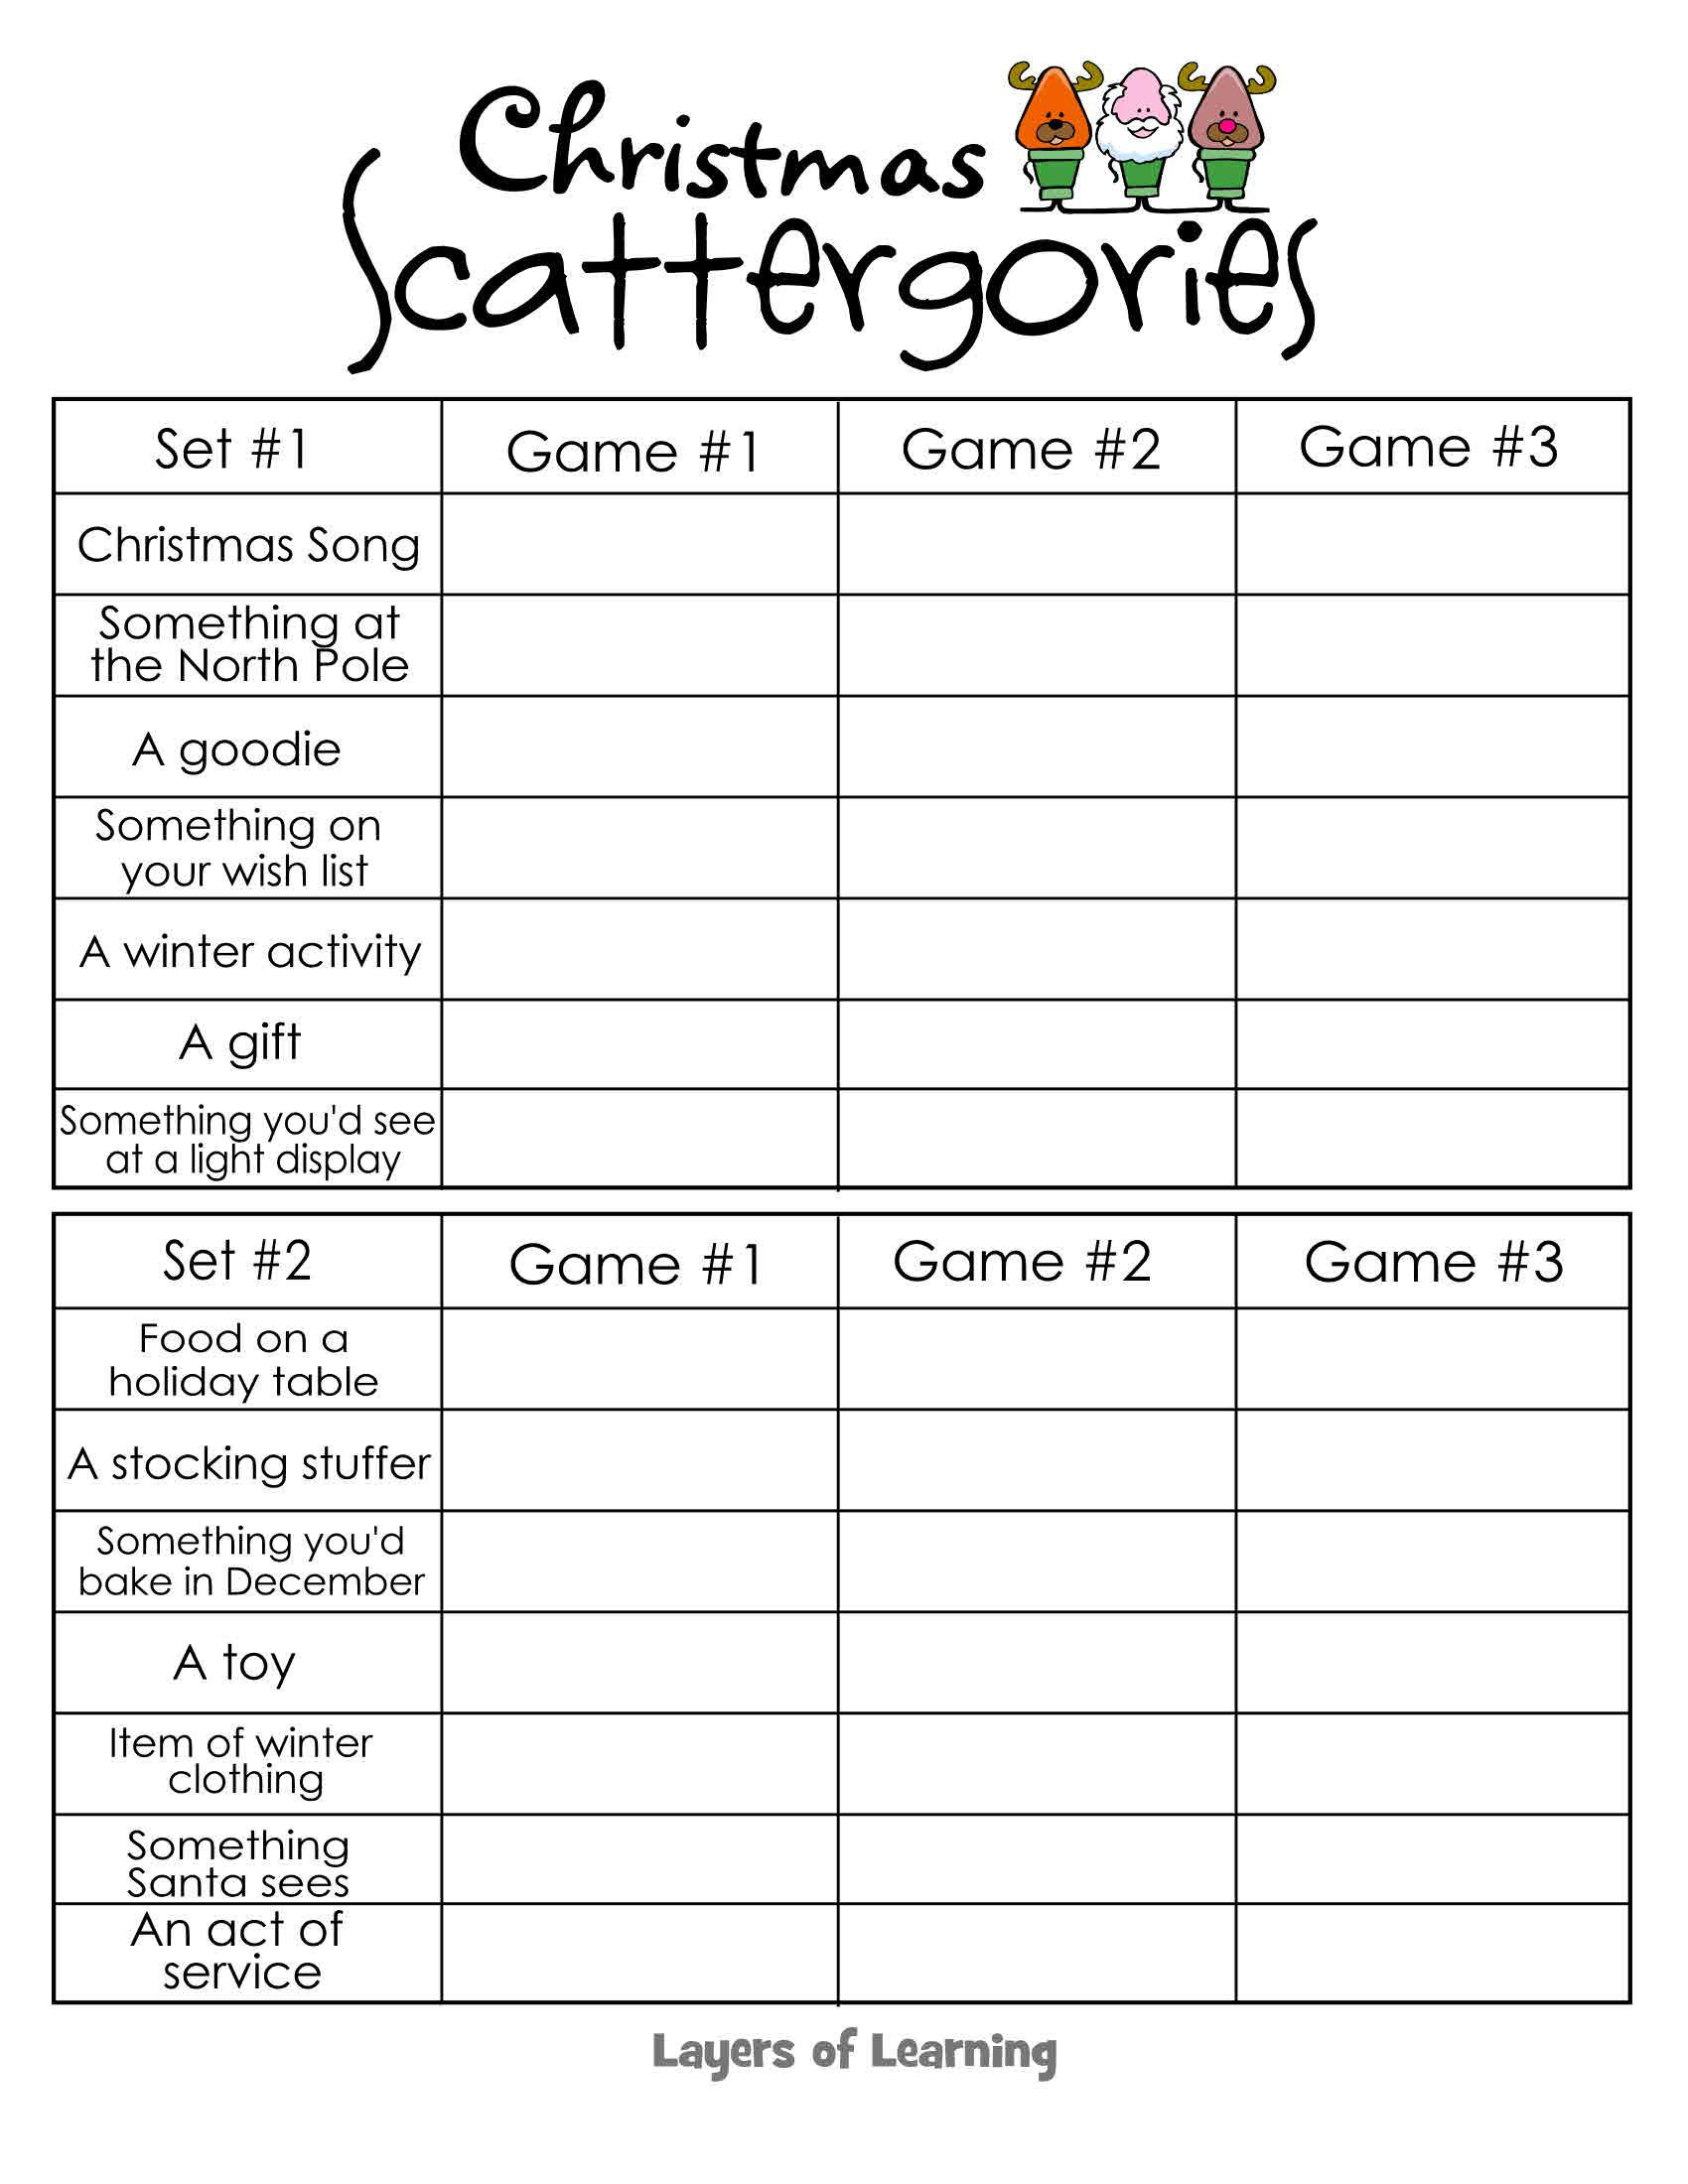 Christmas Scattergories | Homeschool Holidayopedia | Pinterest - Free Printable Games For Adults